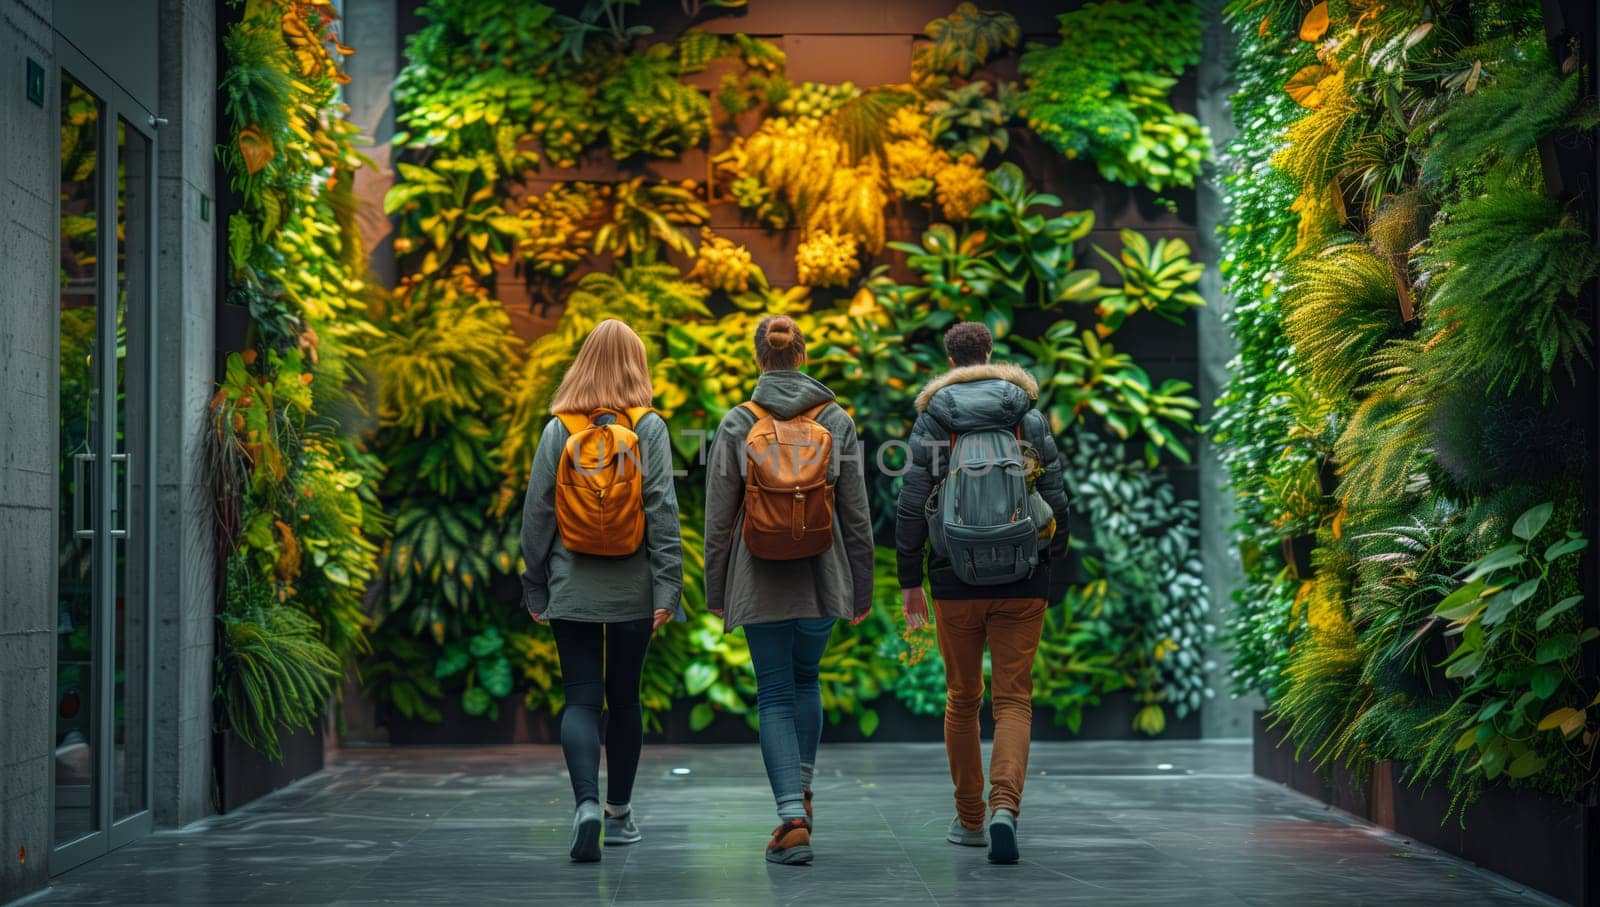 Three people with backpacks are strolling leisurely down a hallway, surrounded by a natural landscape with trees and grass, showcasing a travel event